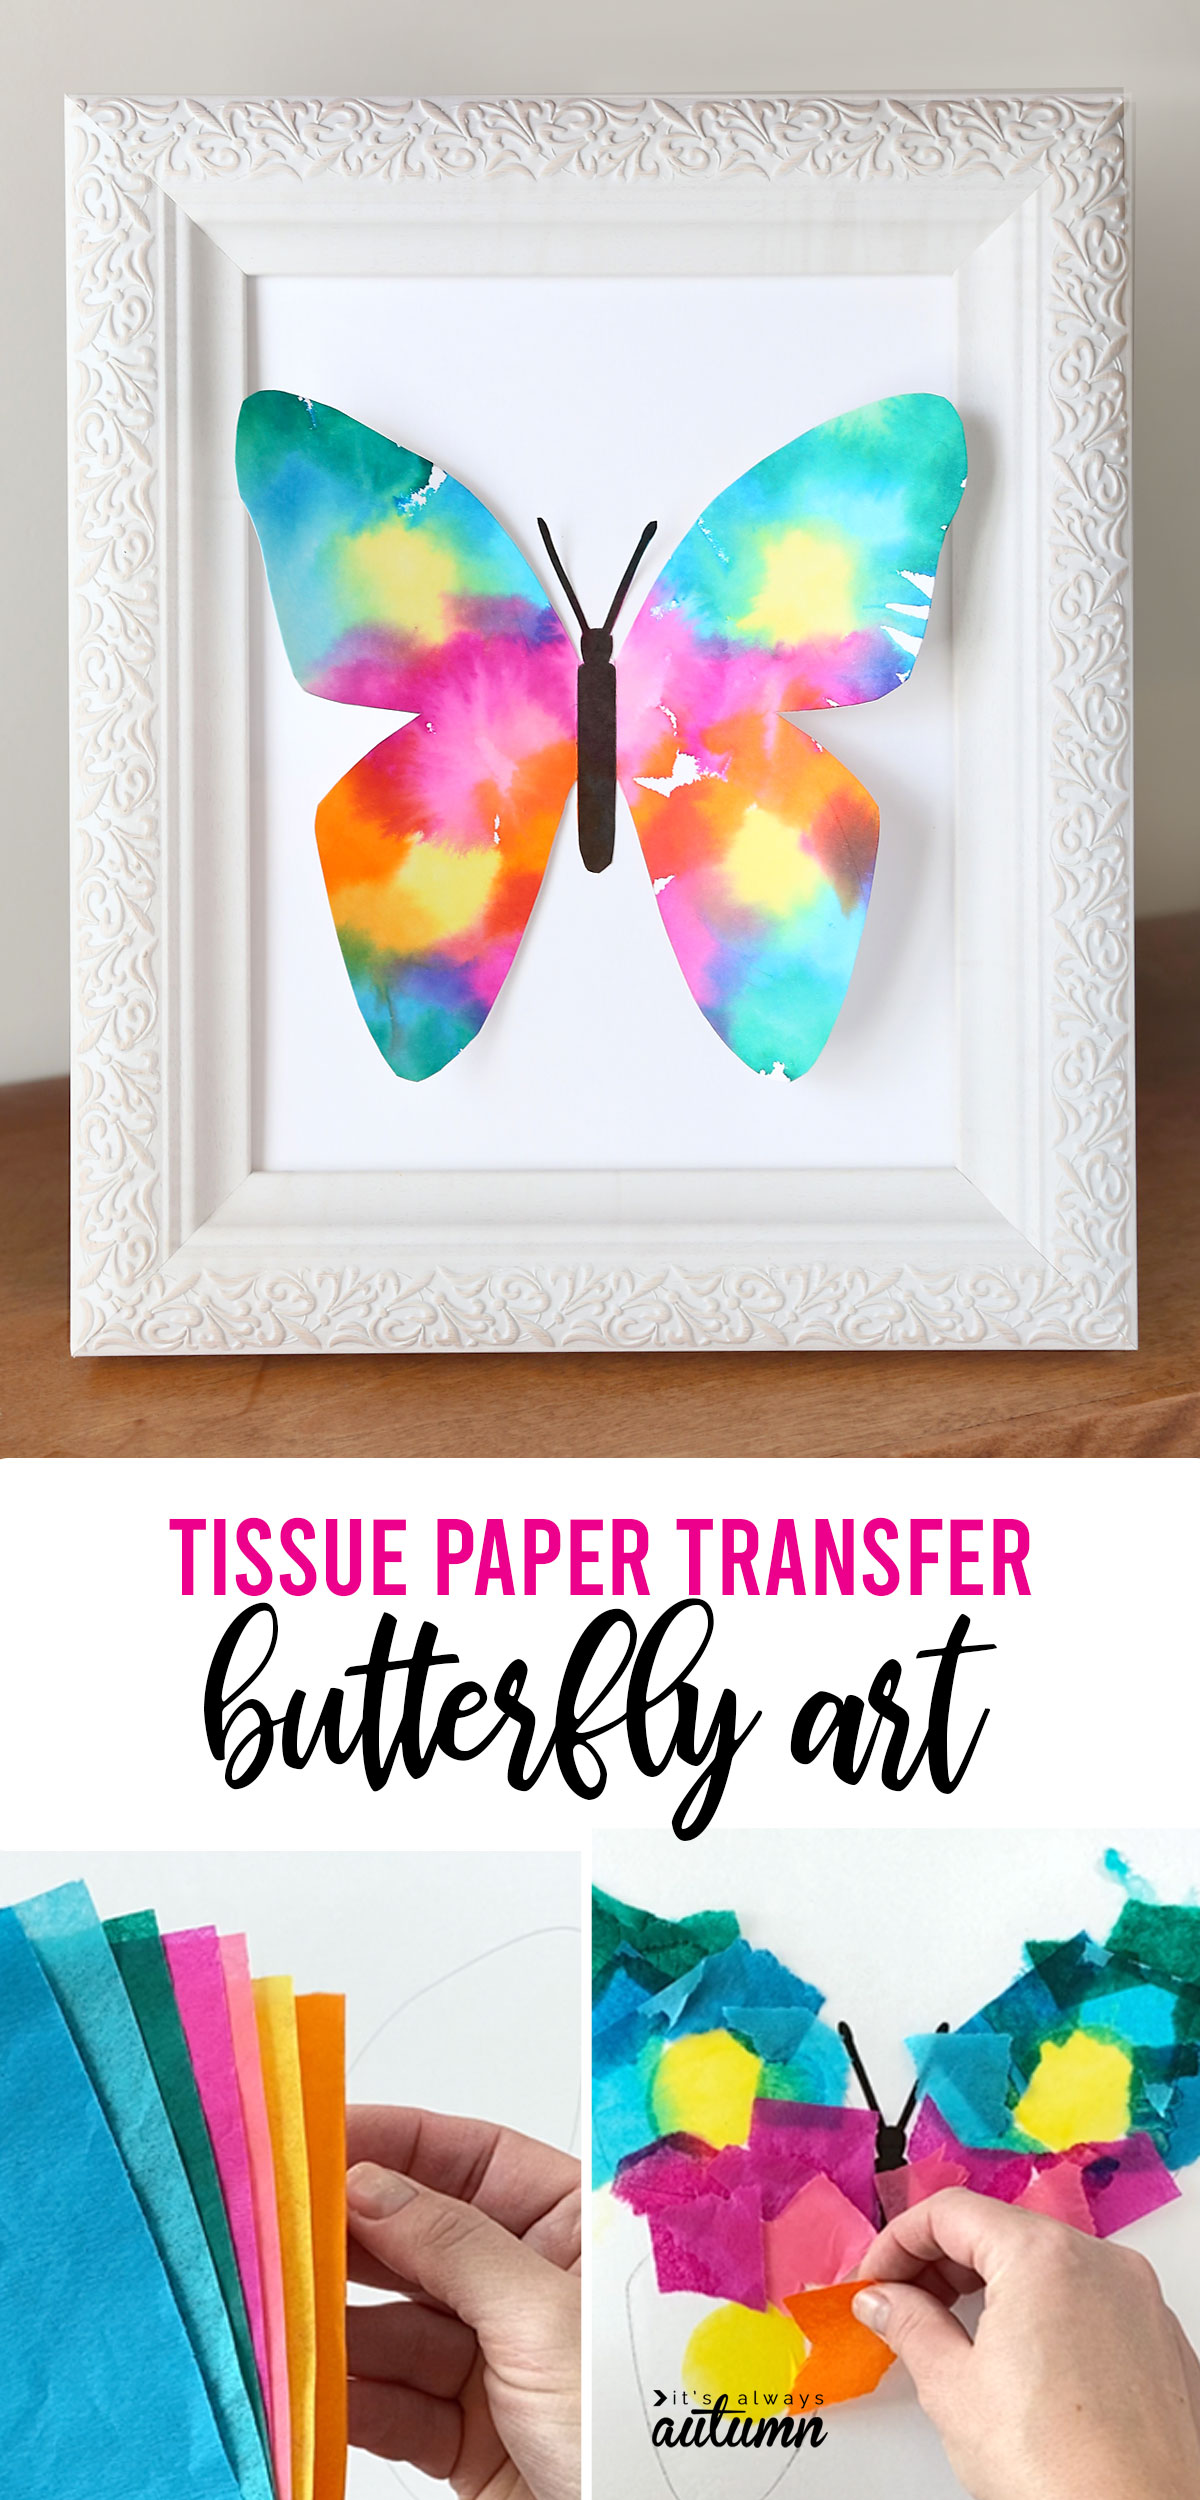 Colorful butterfly made of paper in a white picture frame; hands holding colorful tissue paper; hands placing squares of tissue paper on butterfly outline